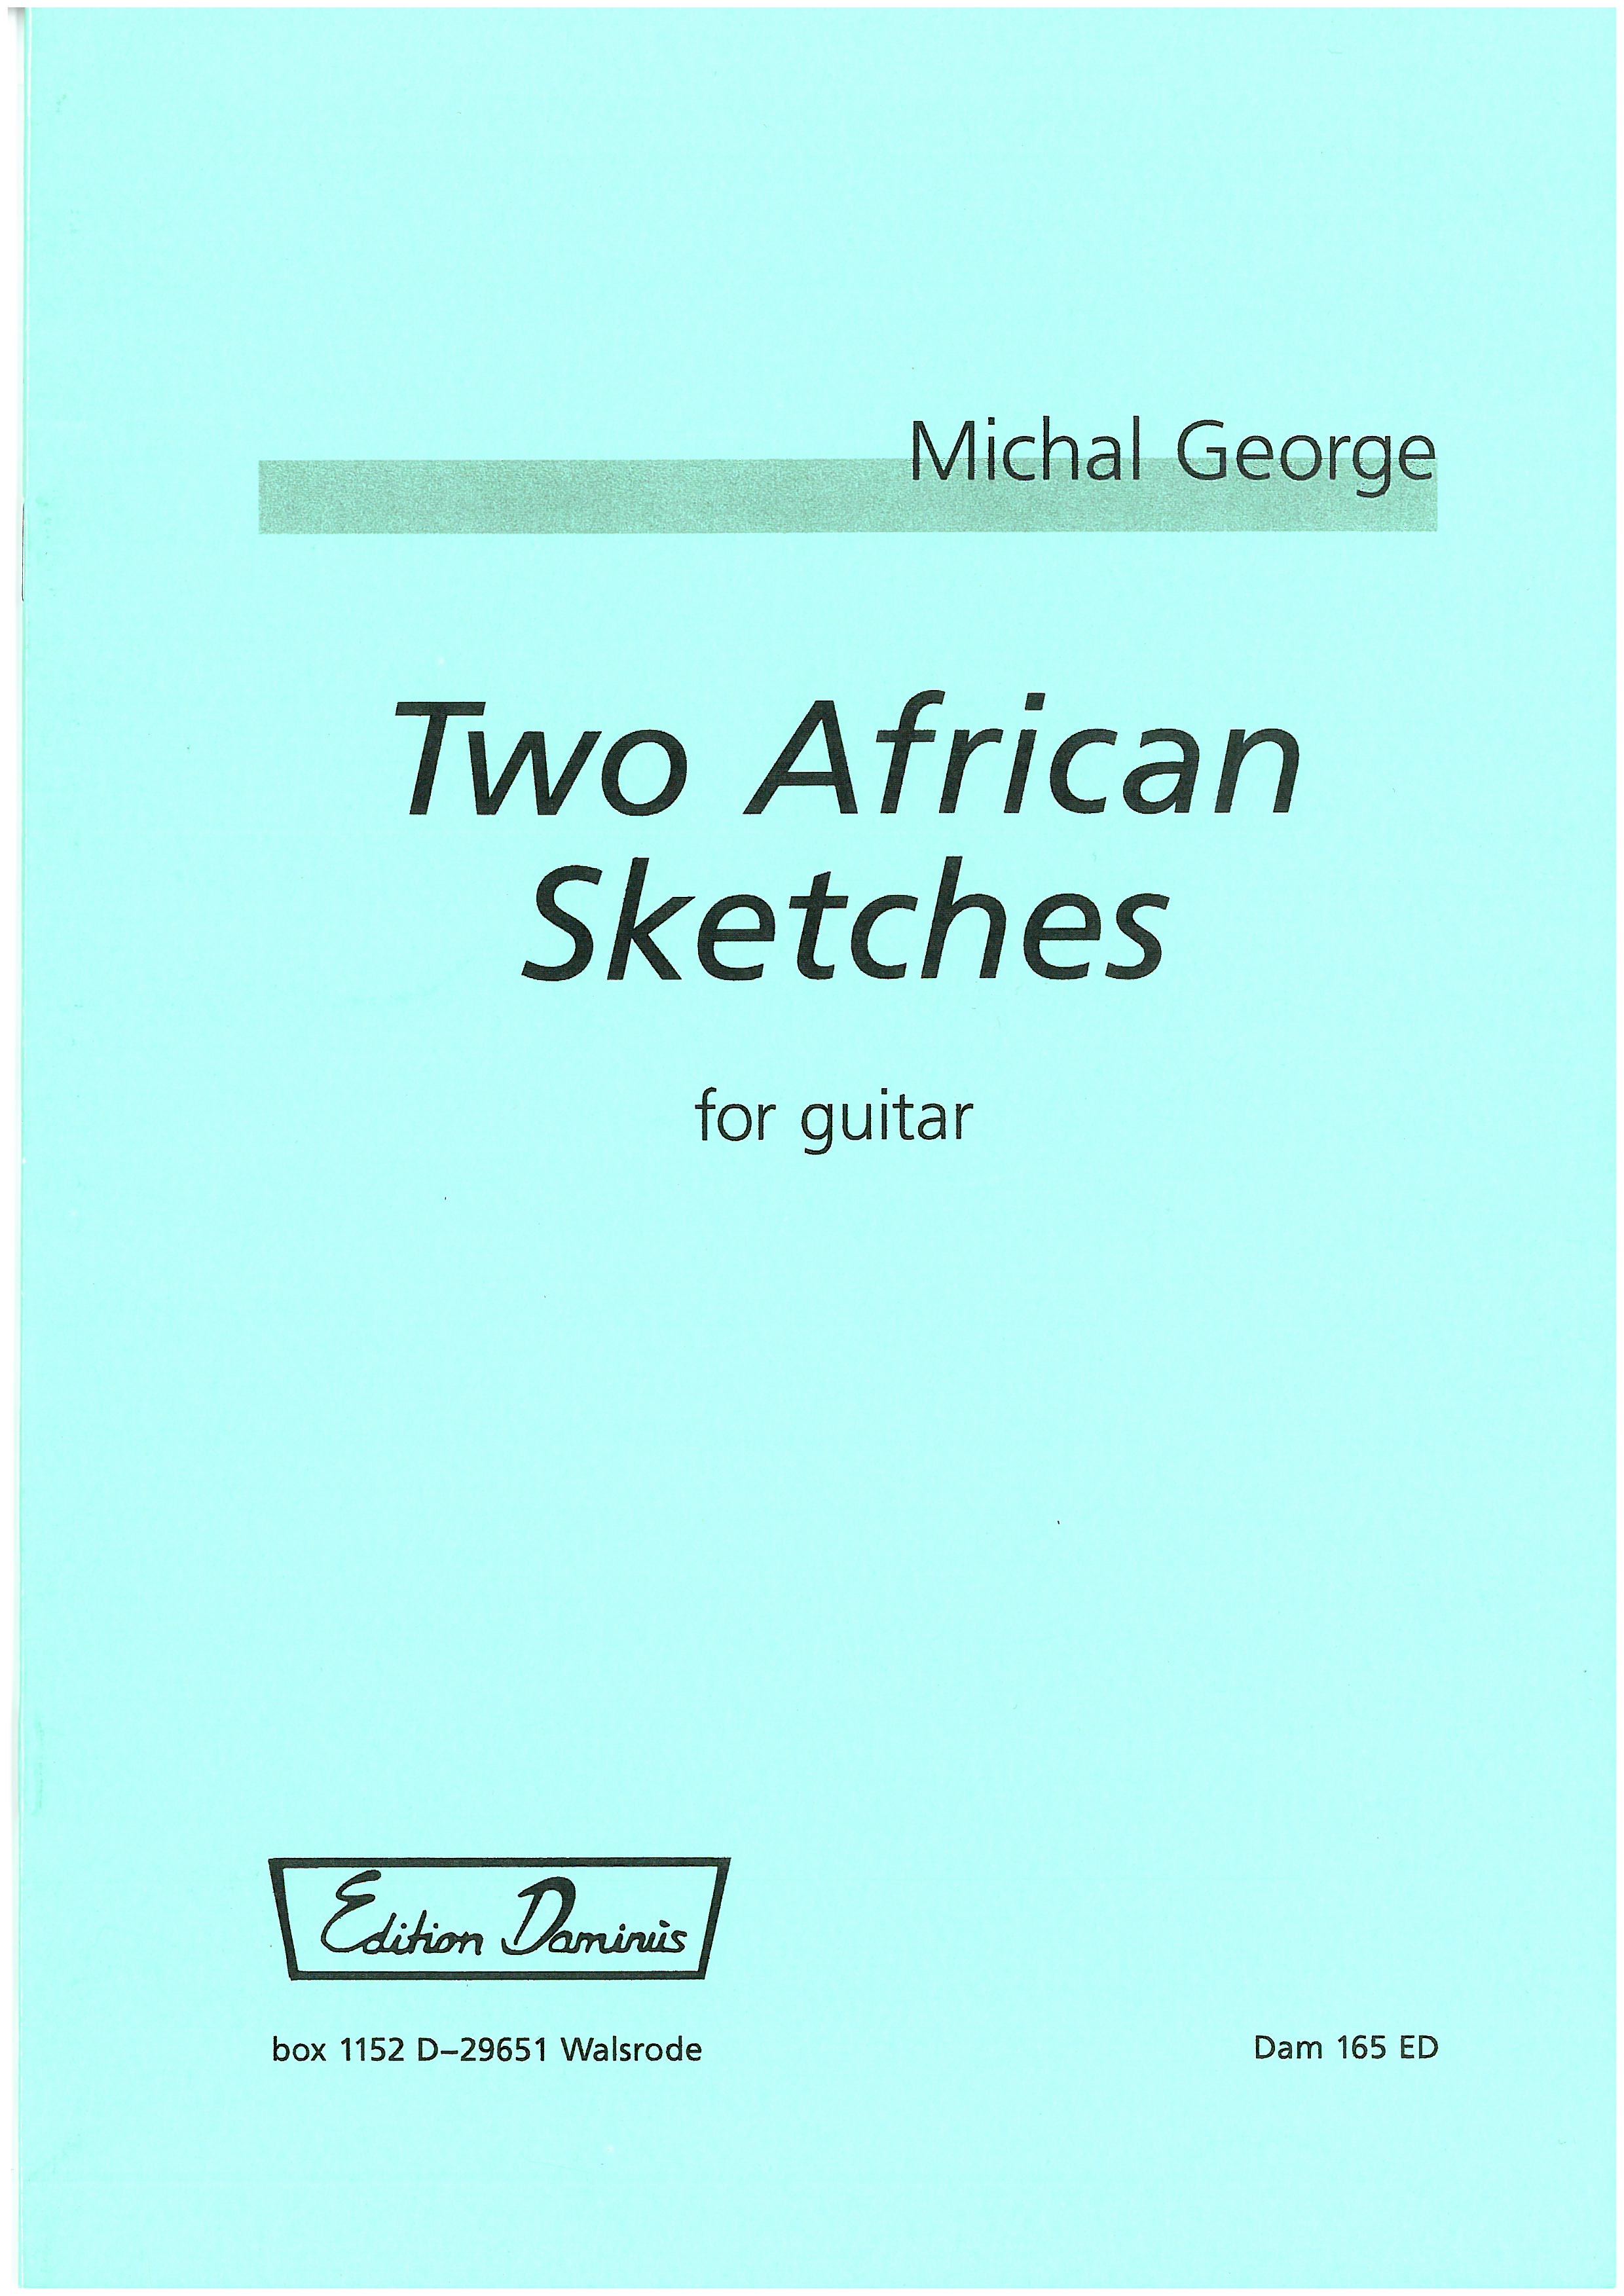 2 African Sketches